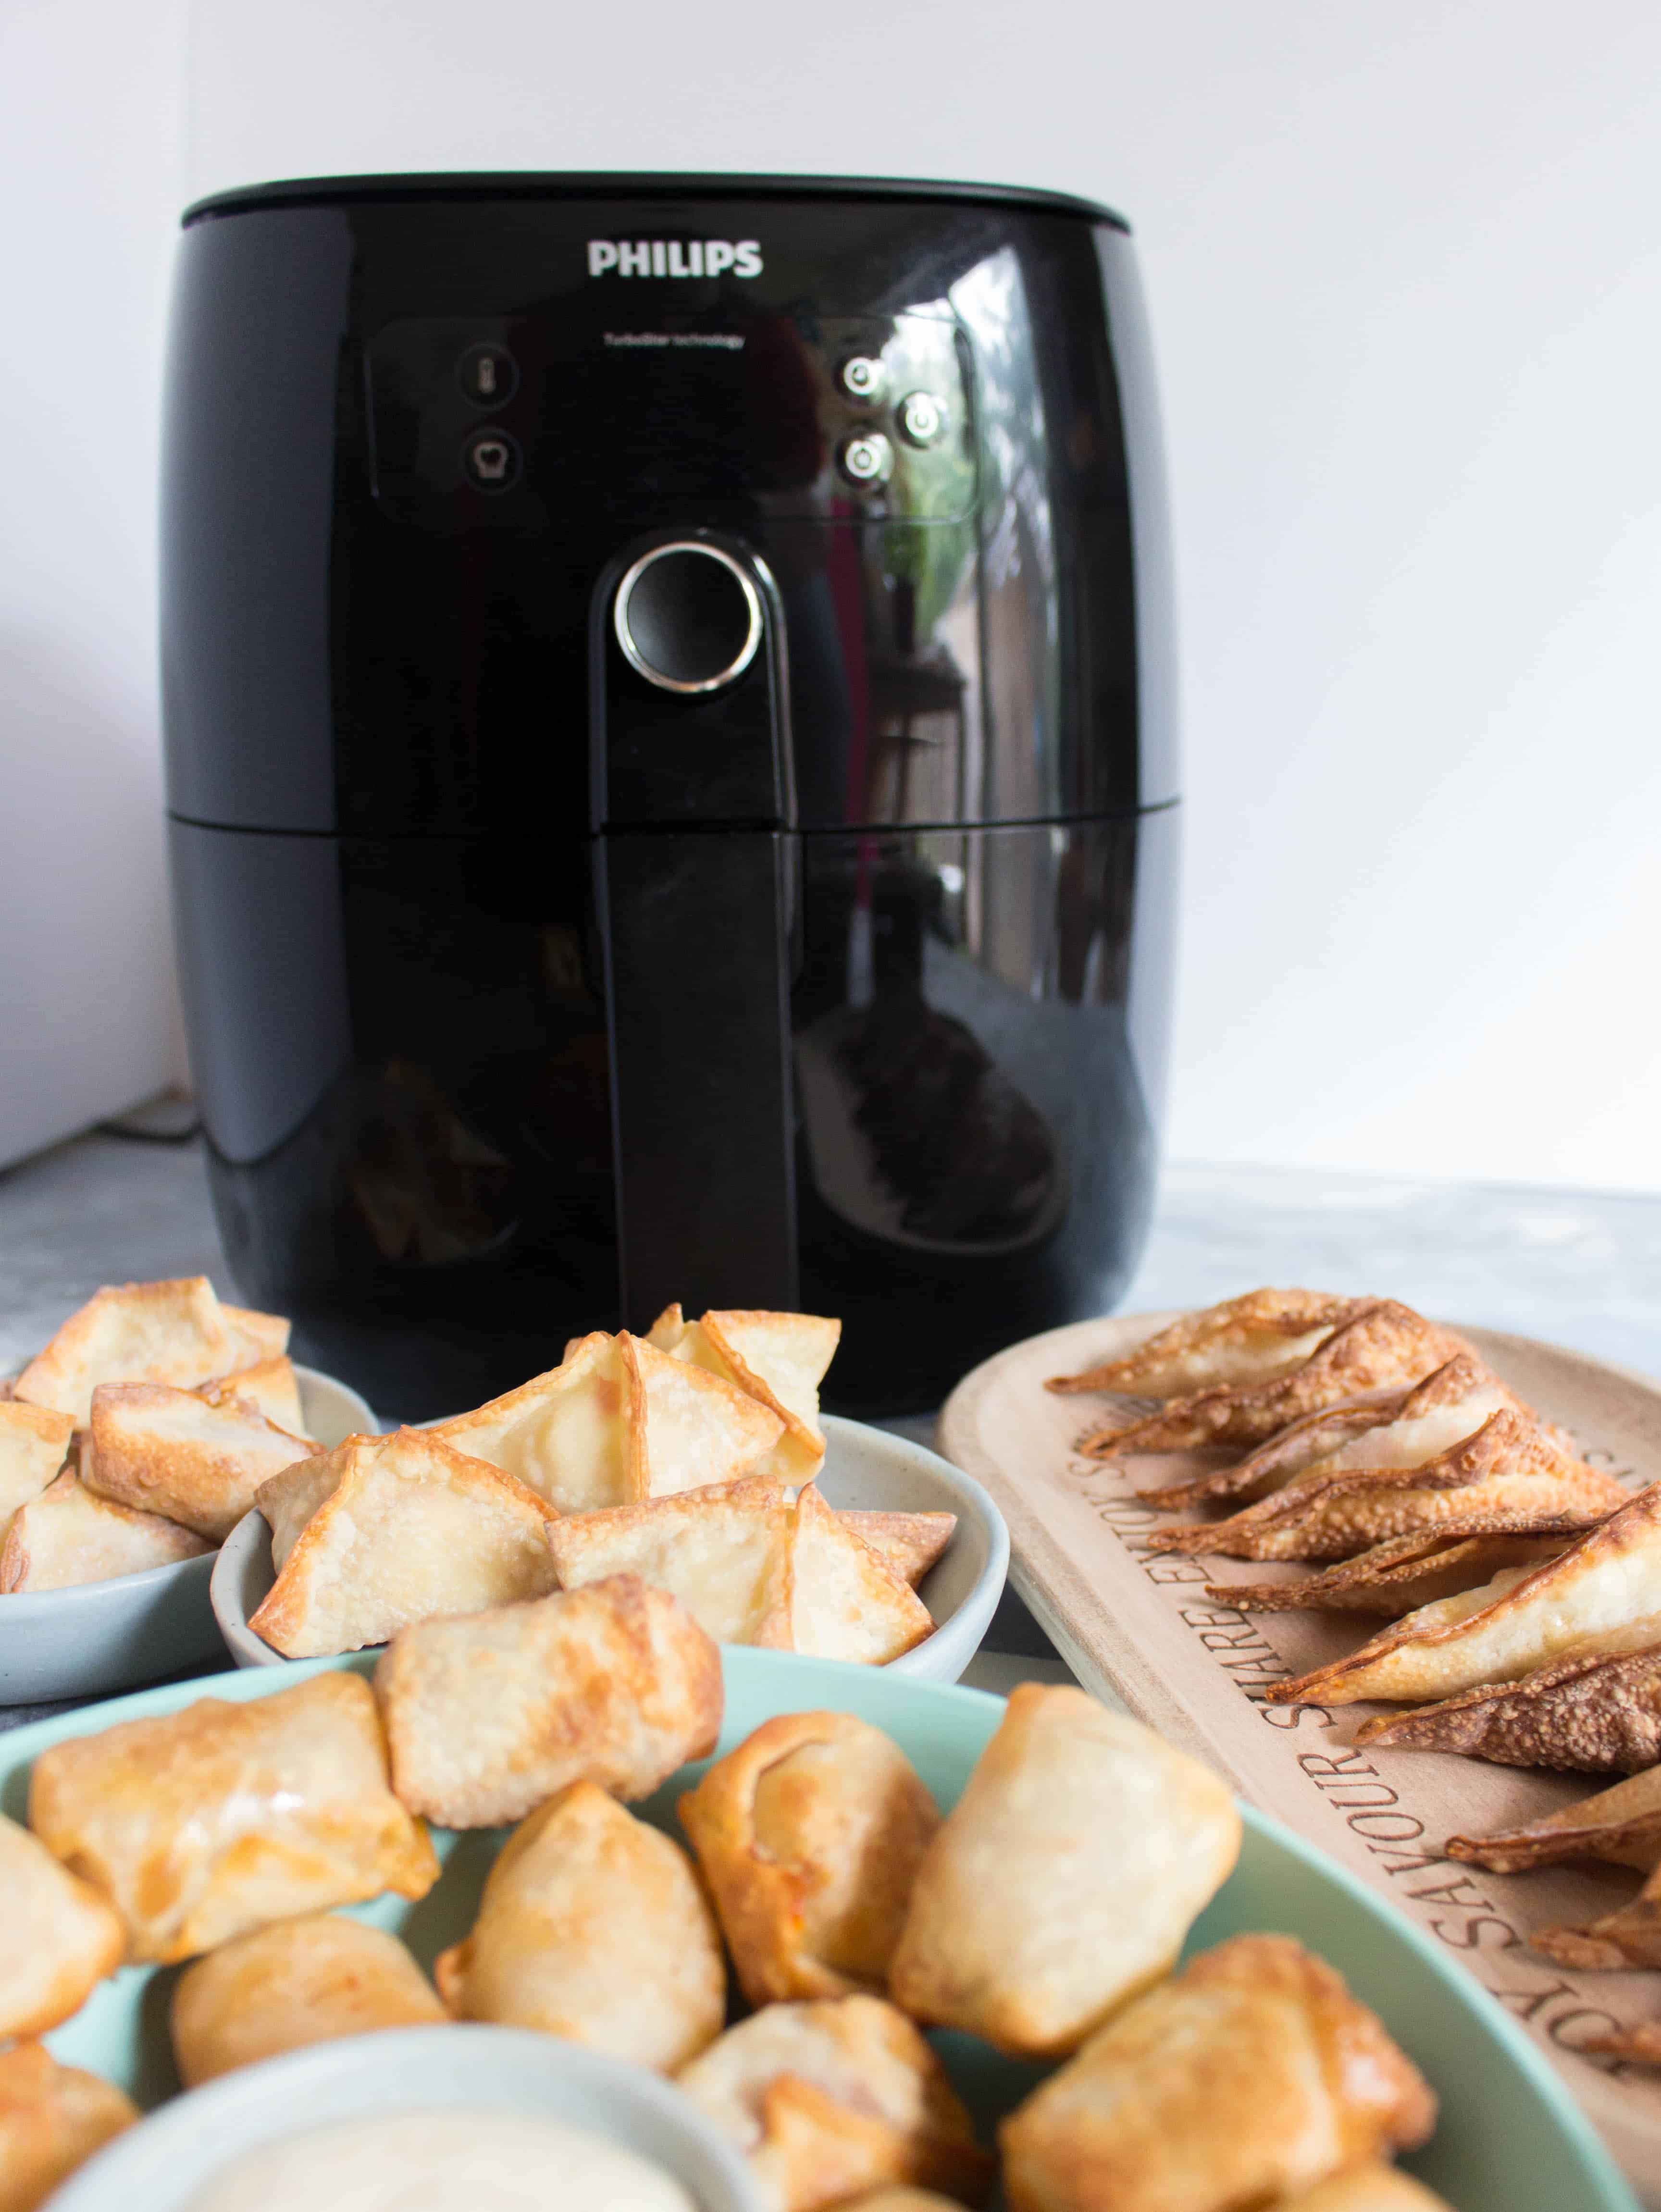 Do you often crave that crunch from deep fried foods while watching the game on TV? Want an healthier alternative that's not carrot sticks? Try these party snacks: wontons 3 ways with an Airfryer! The perfect little bites!